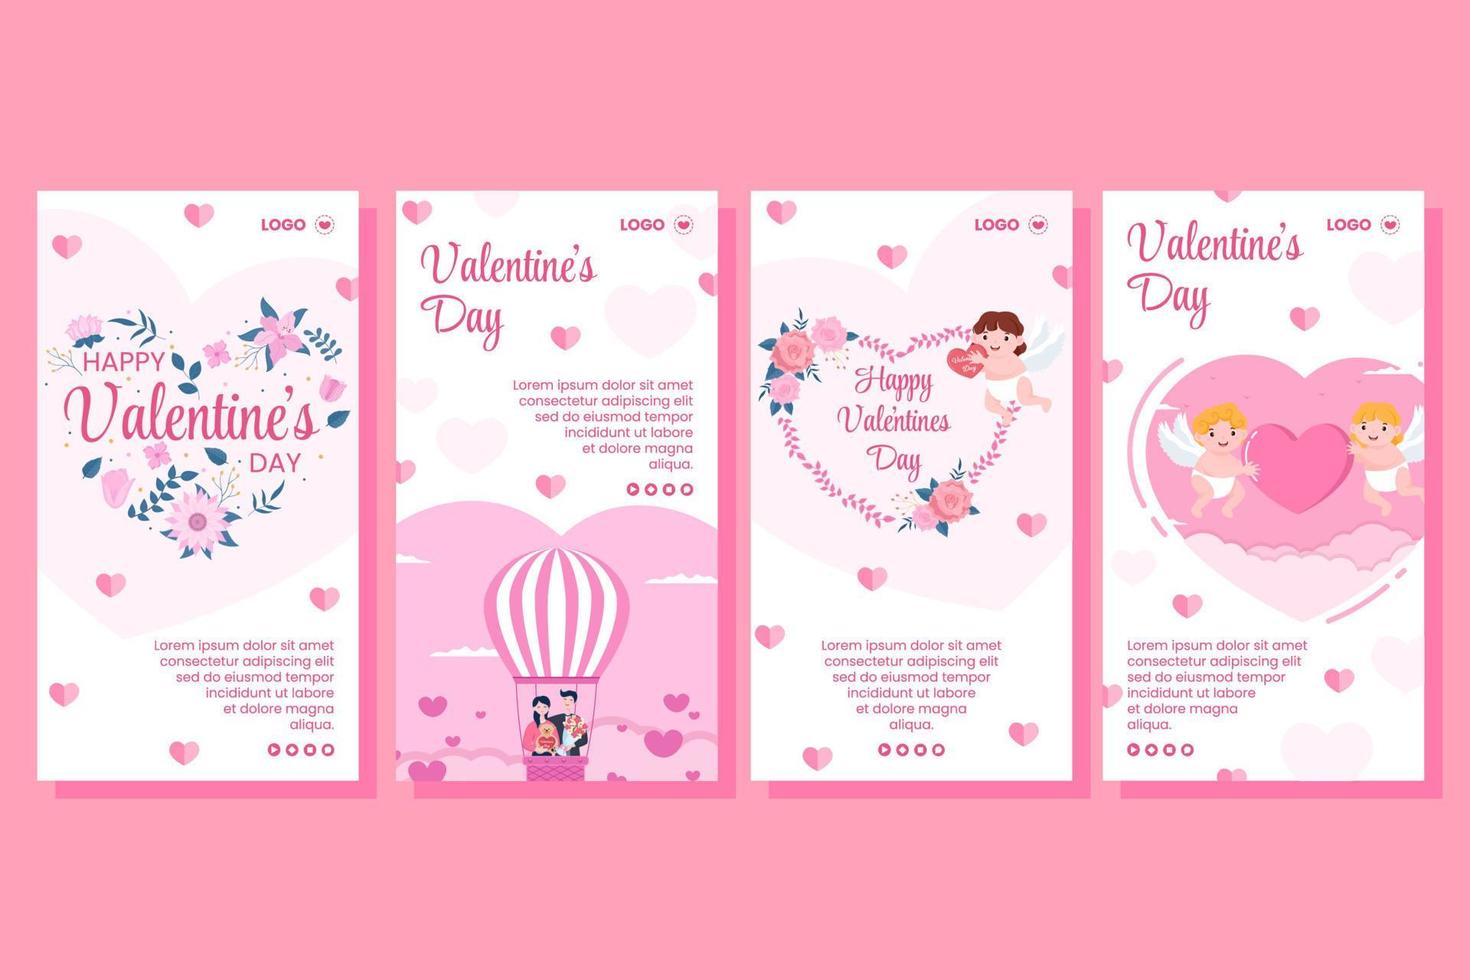 Happy Valentine's Day Stories Template Flat Design Illustration Editable of Square Background for Social media, Love Greeting Card or Banner vector